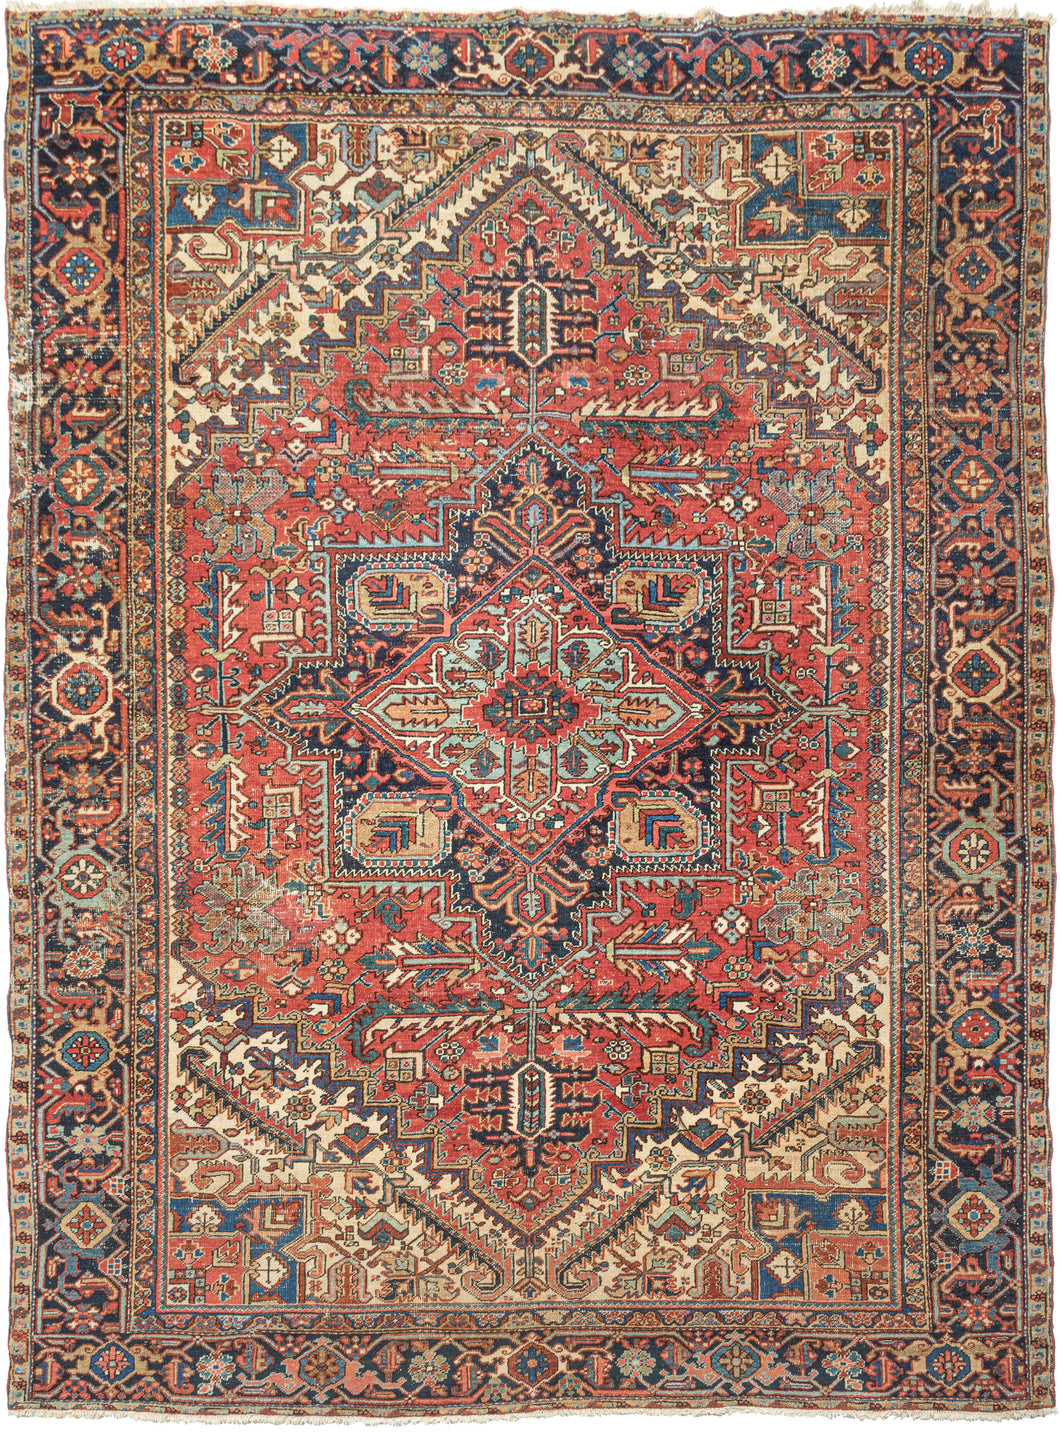 This ﻿Heriz rug was handwoven in Northwest Iran during the second quarter of the 20th century.  This classic Heriz features a geometric central medallion on a madder red ground. The four cornices loosely mirror the field design in a different color combination with the use of ivory working to light the composition. The inclusion of marled yarn palmettes  and 